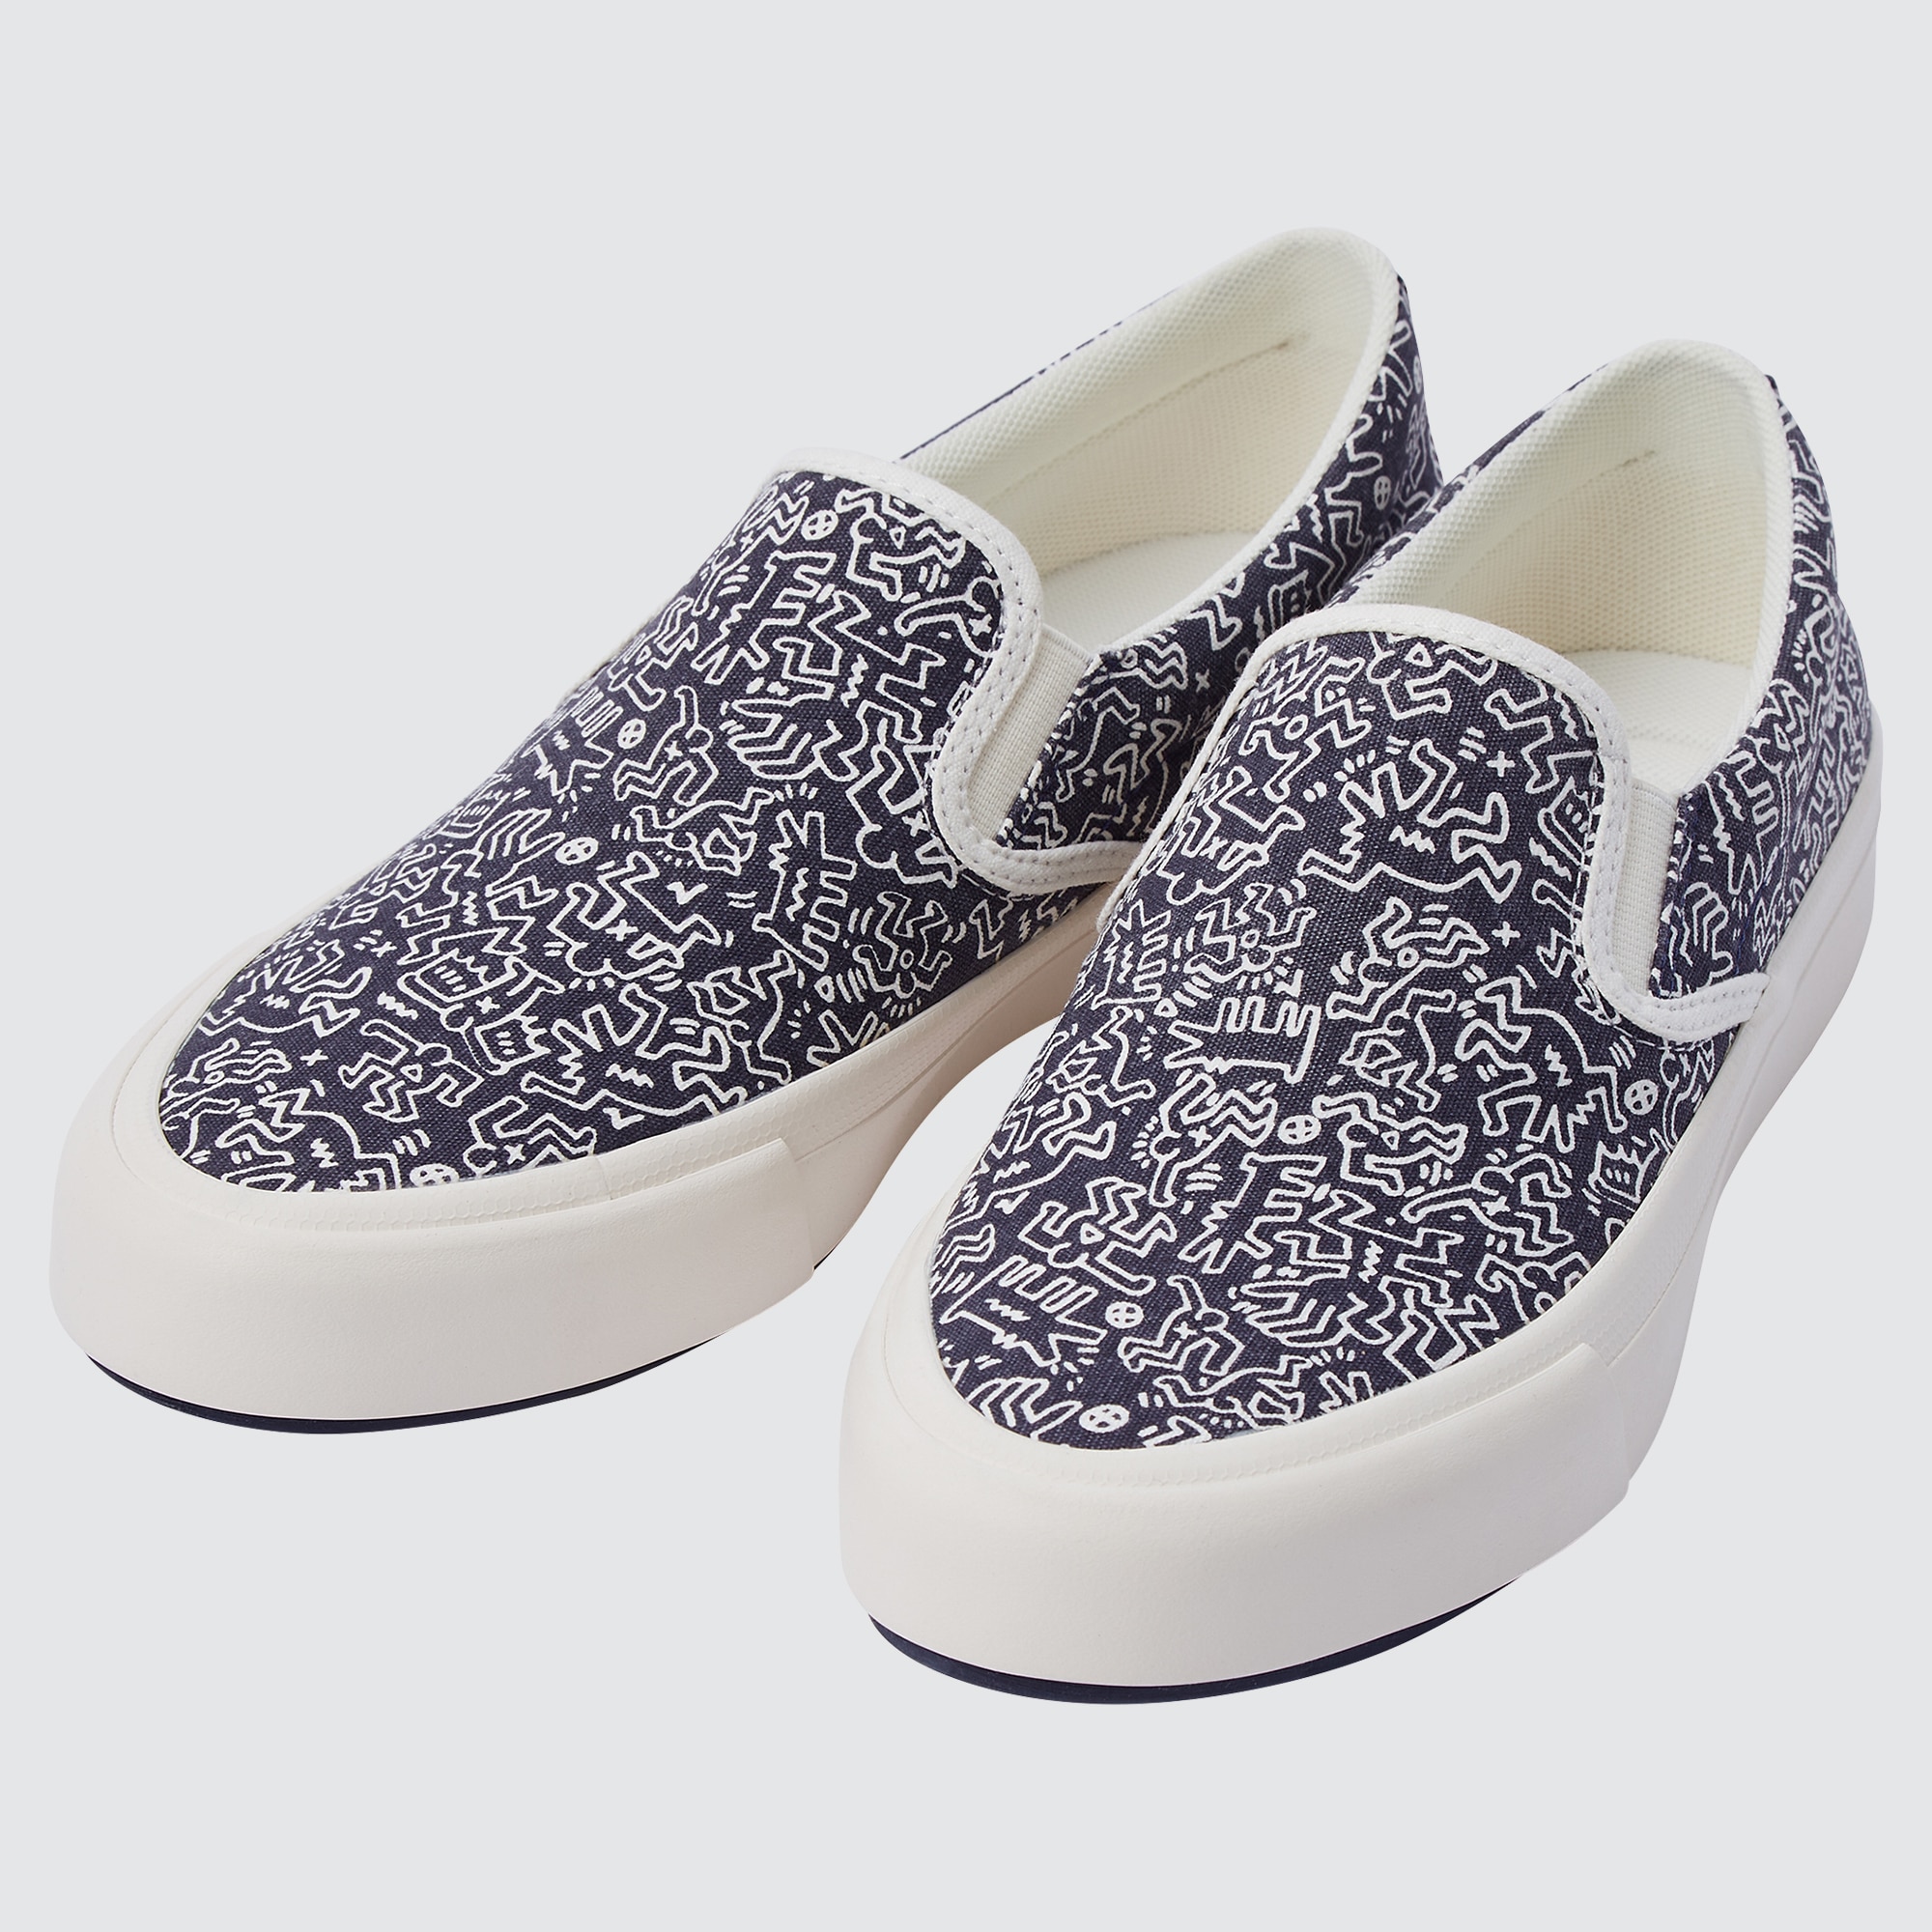 UNIQLO Cotton Canvas Slip-On Shoes | StyleHint